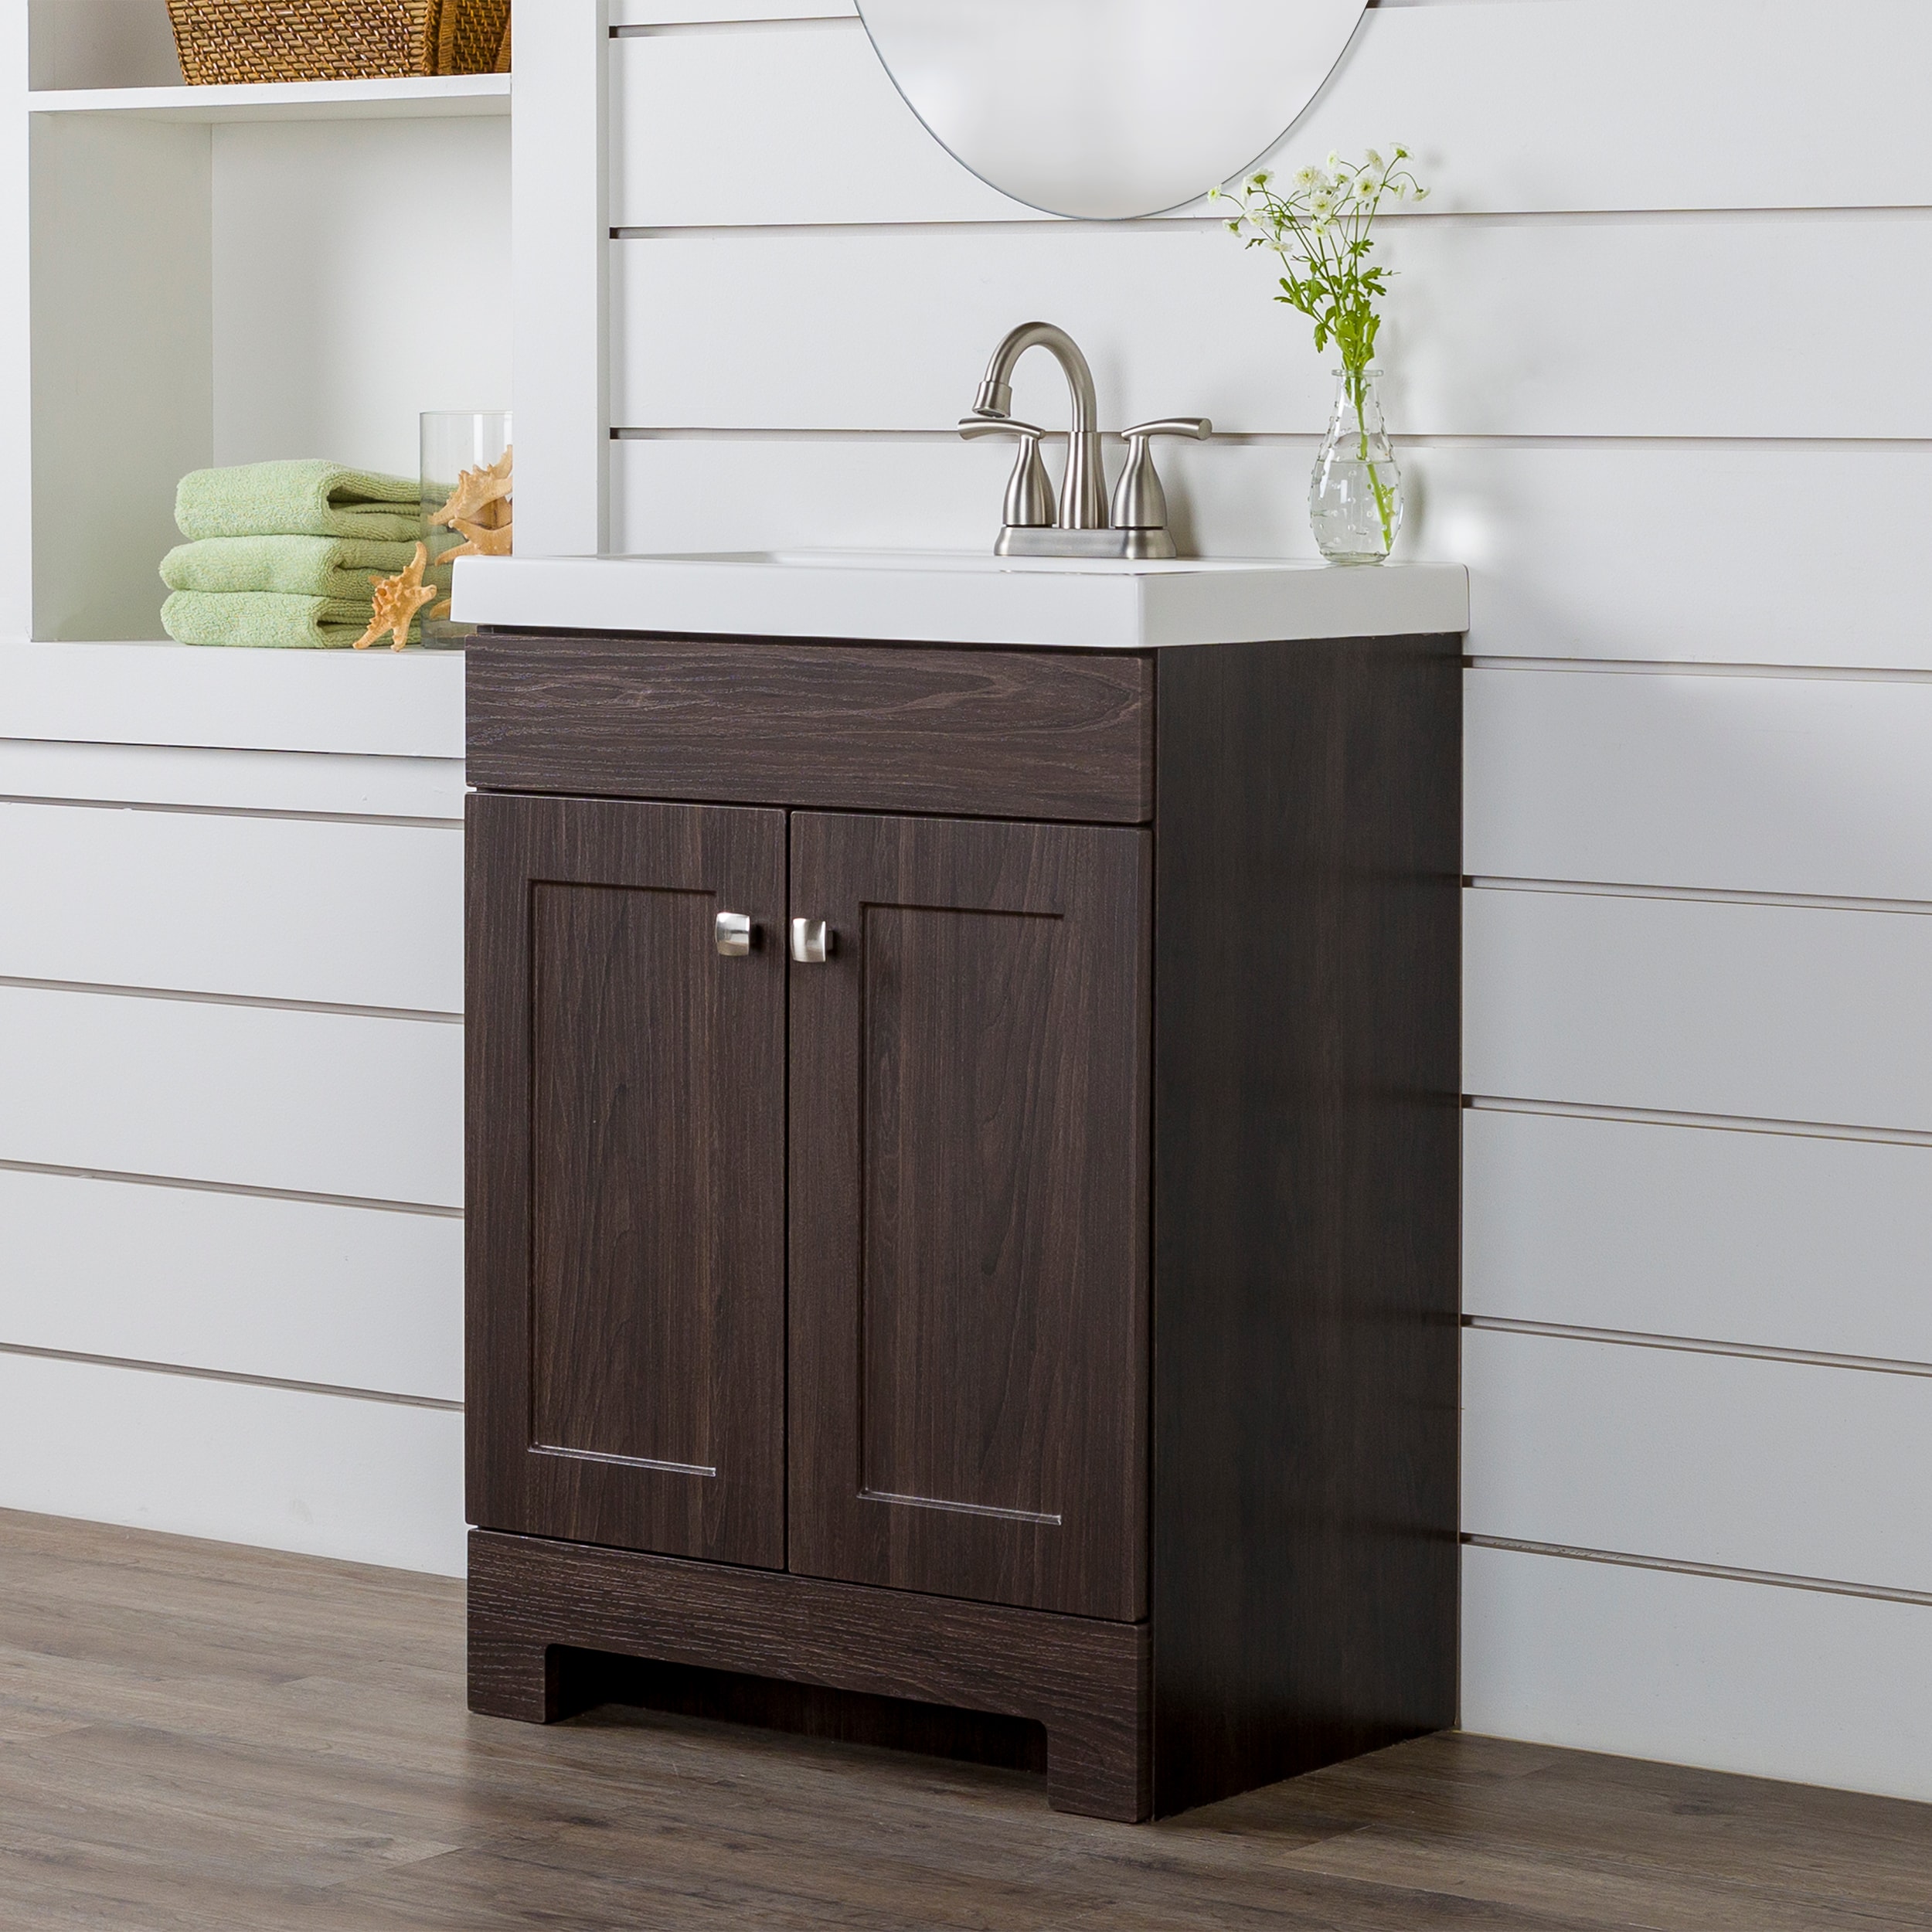 Glacier Bay Laundry Sink Cabinet Review and Installation 